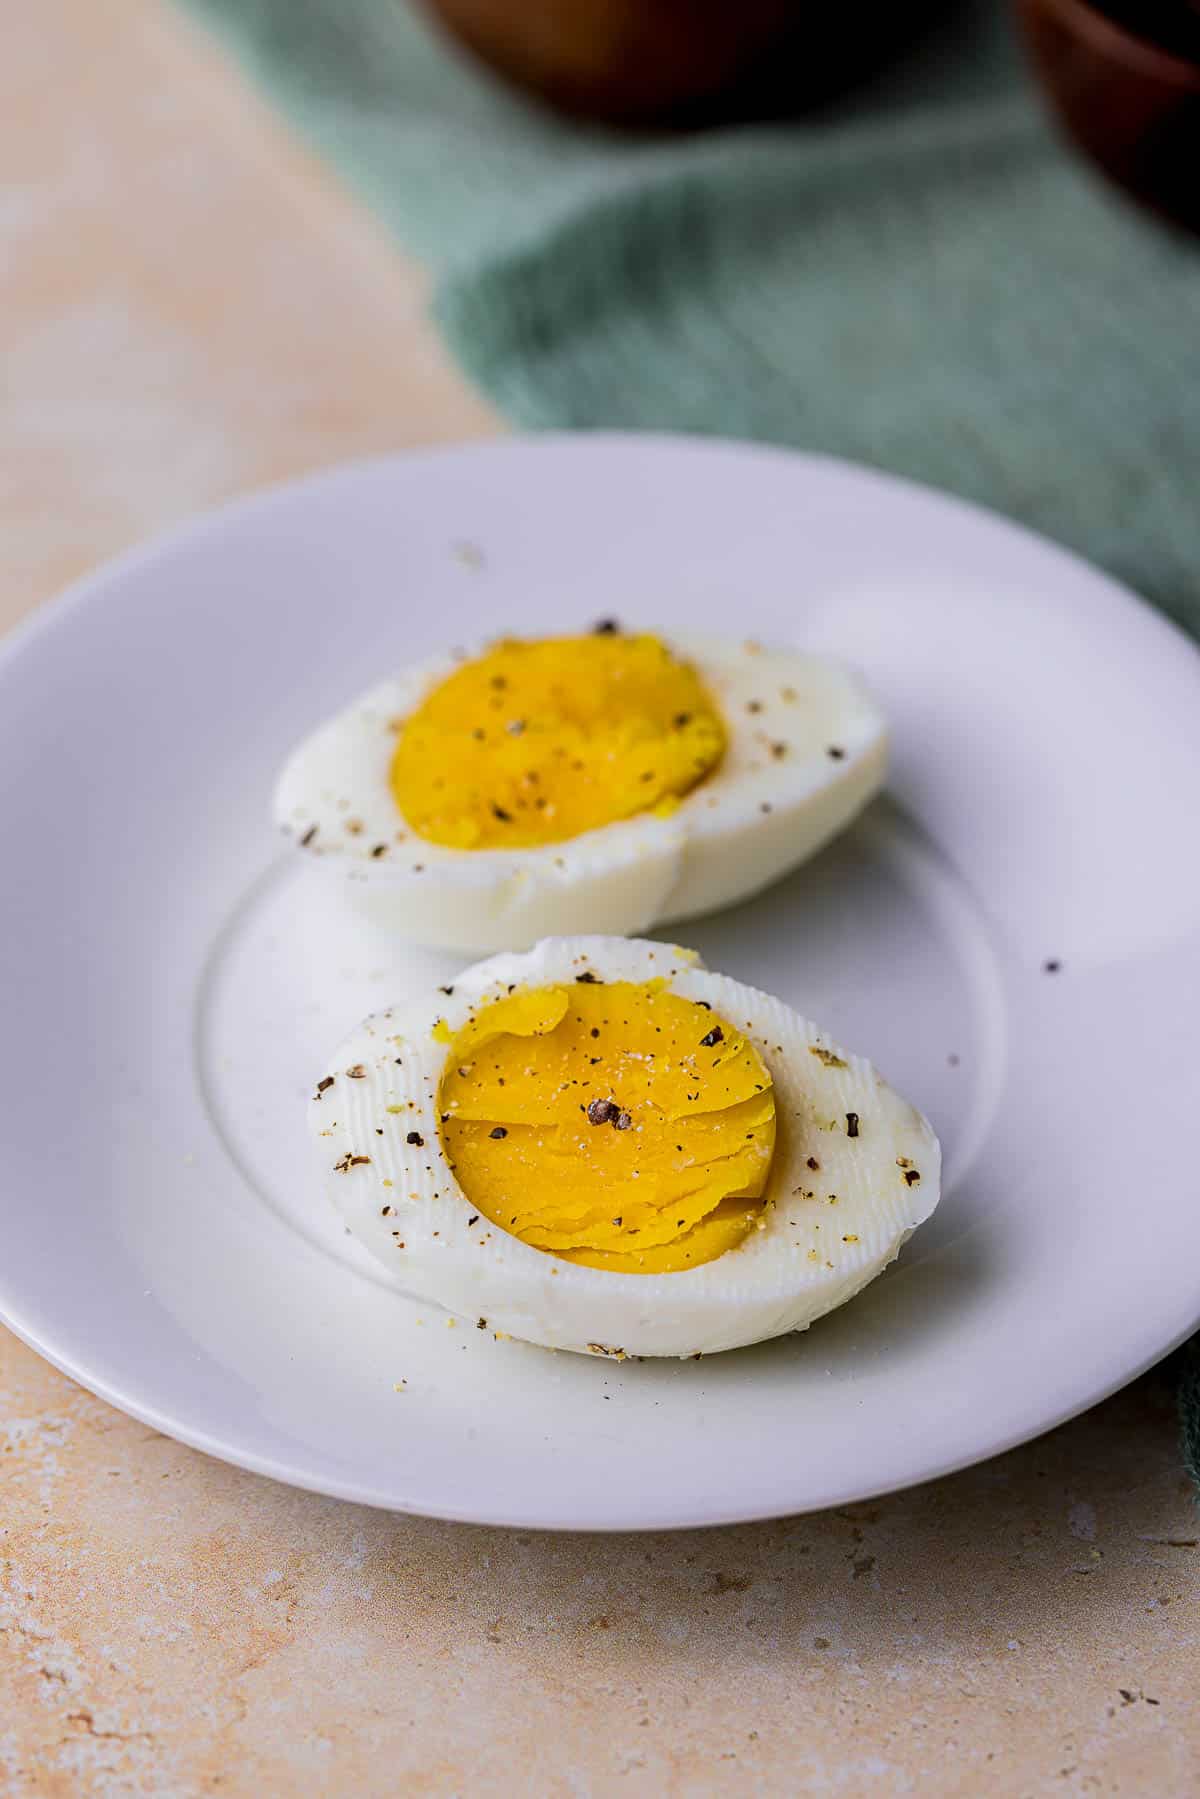 a hard boiled egg cut in half on a plate